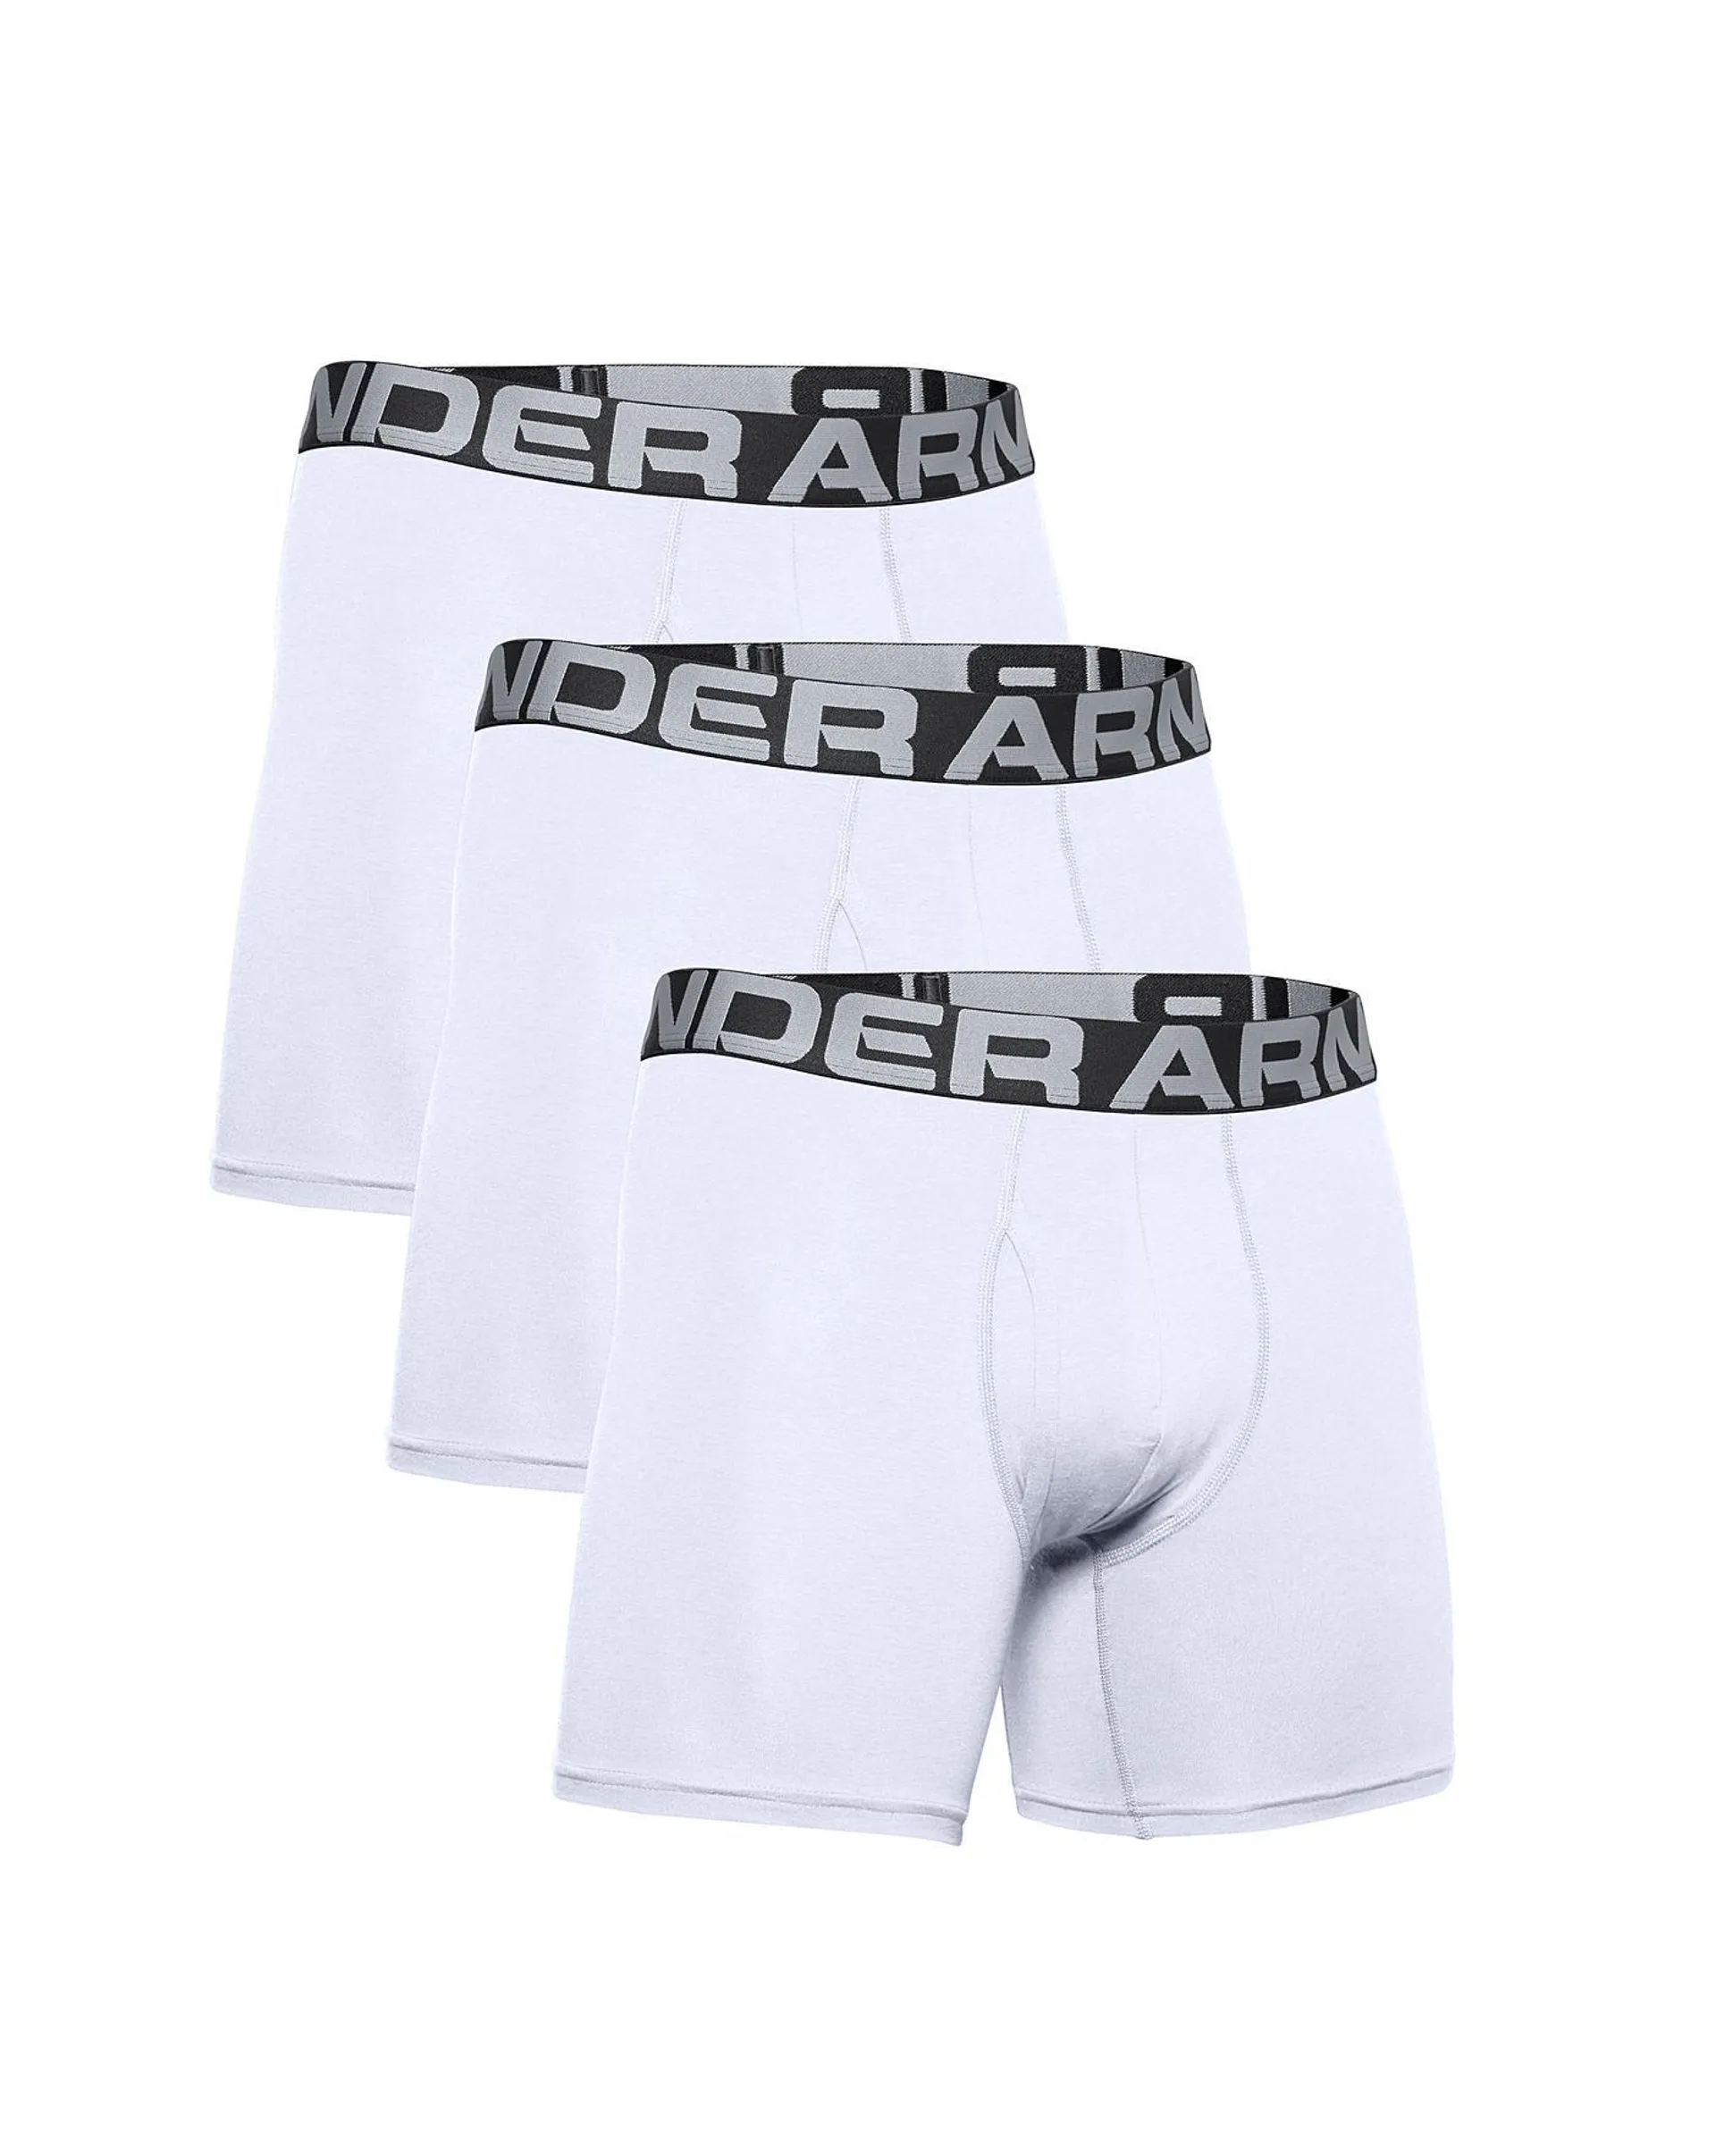 Under Armour Charged Cotton 3 Pck Boxers